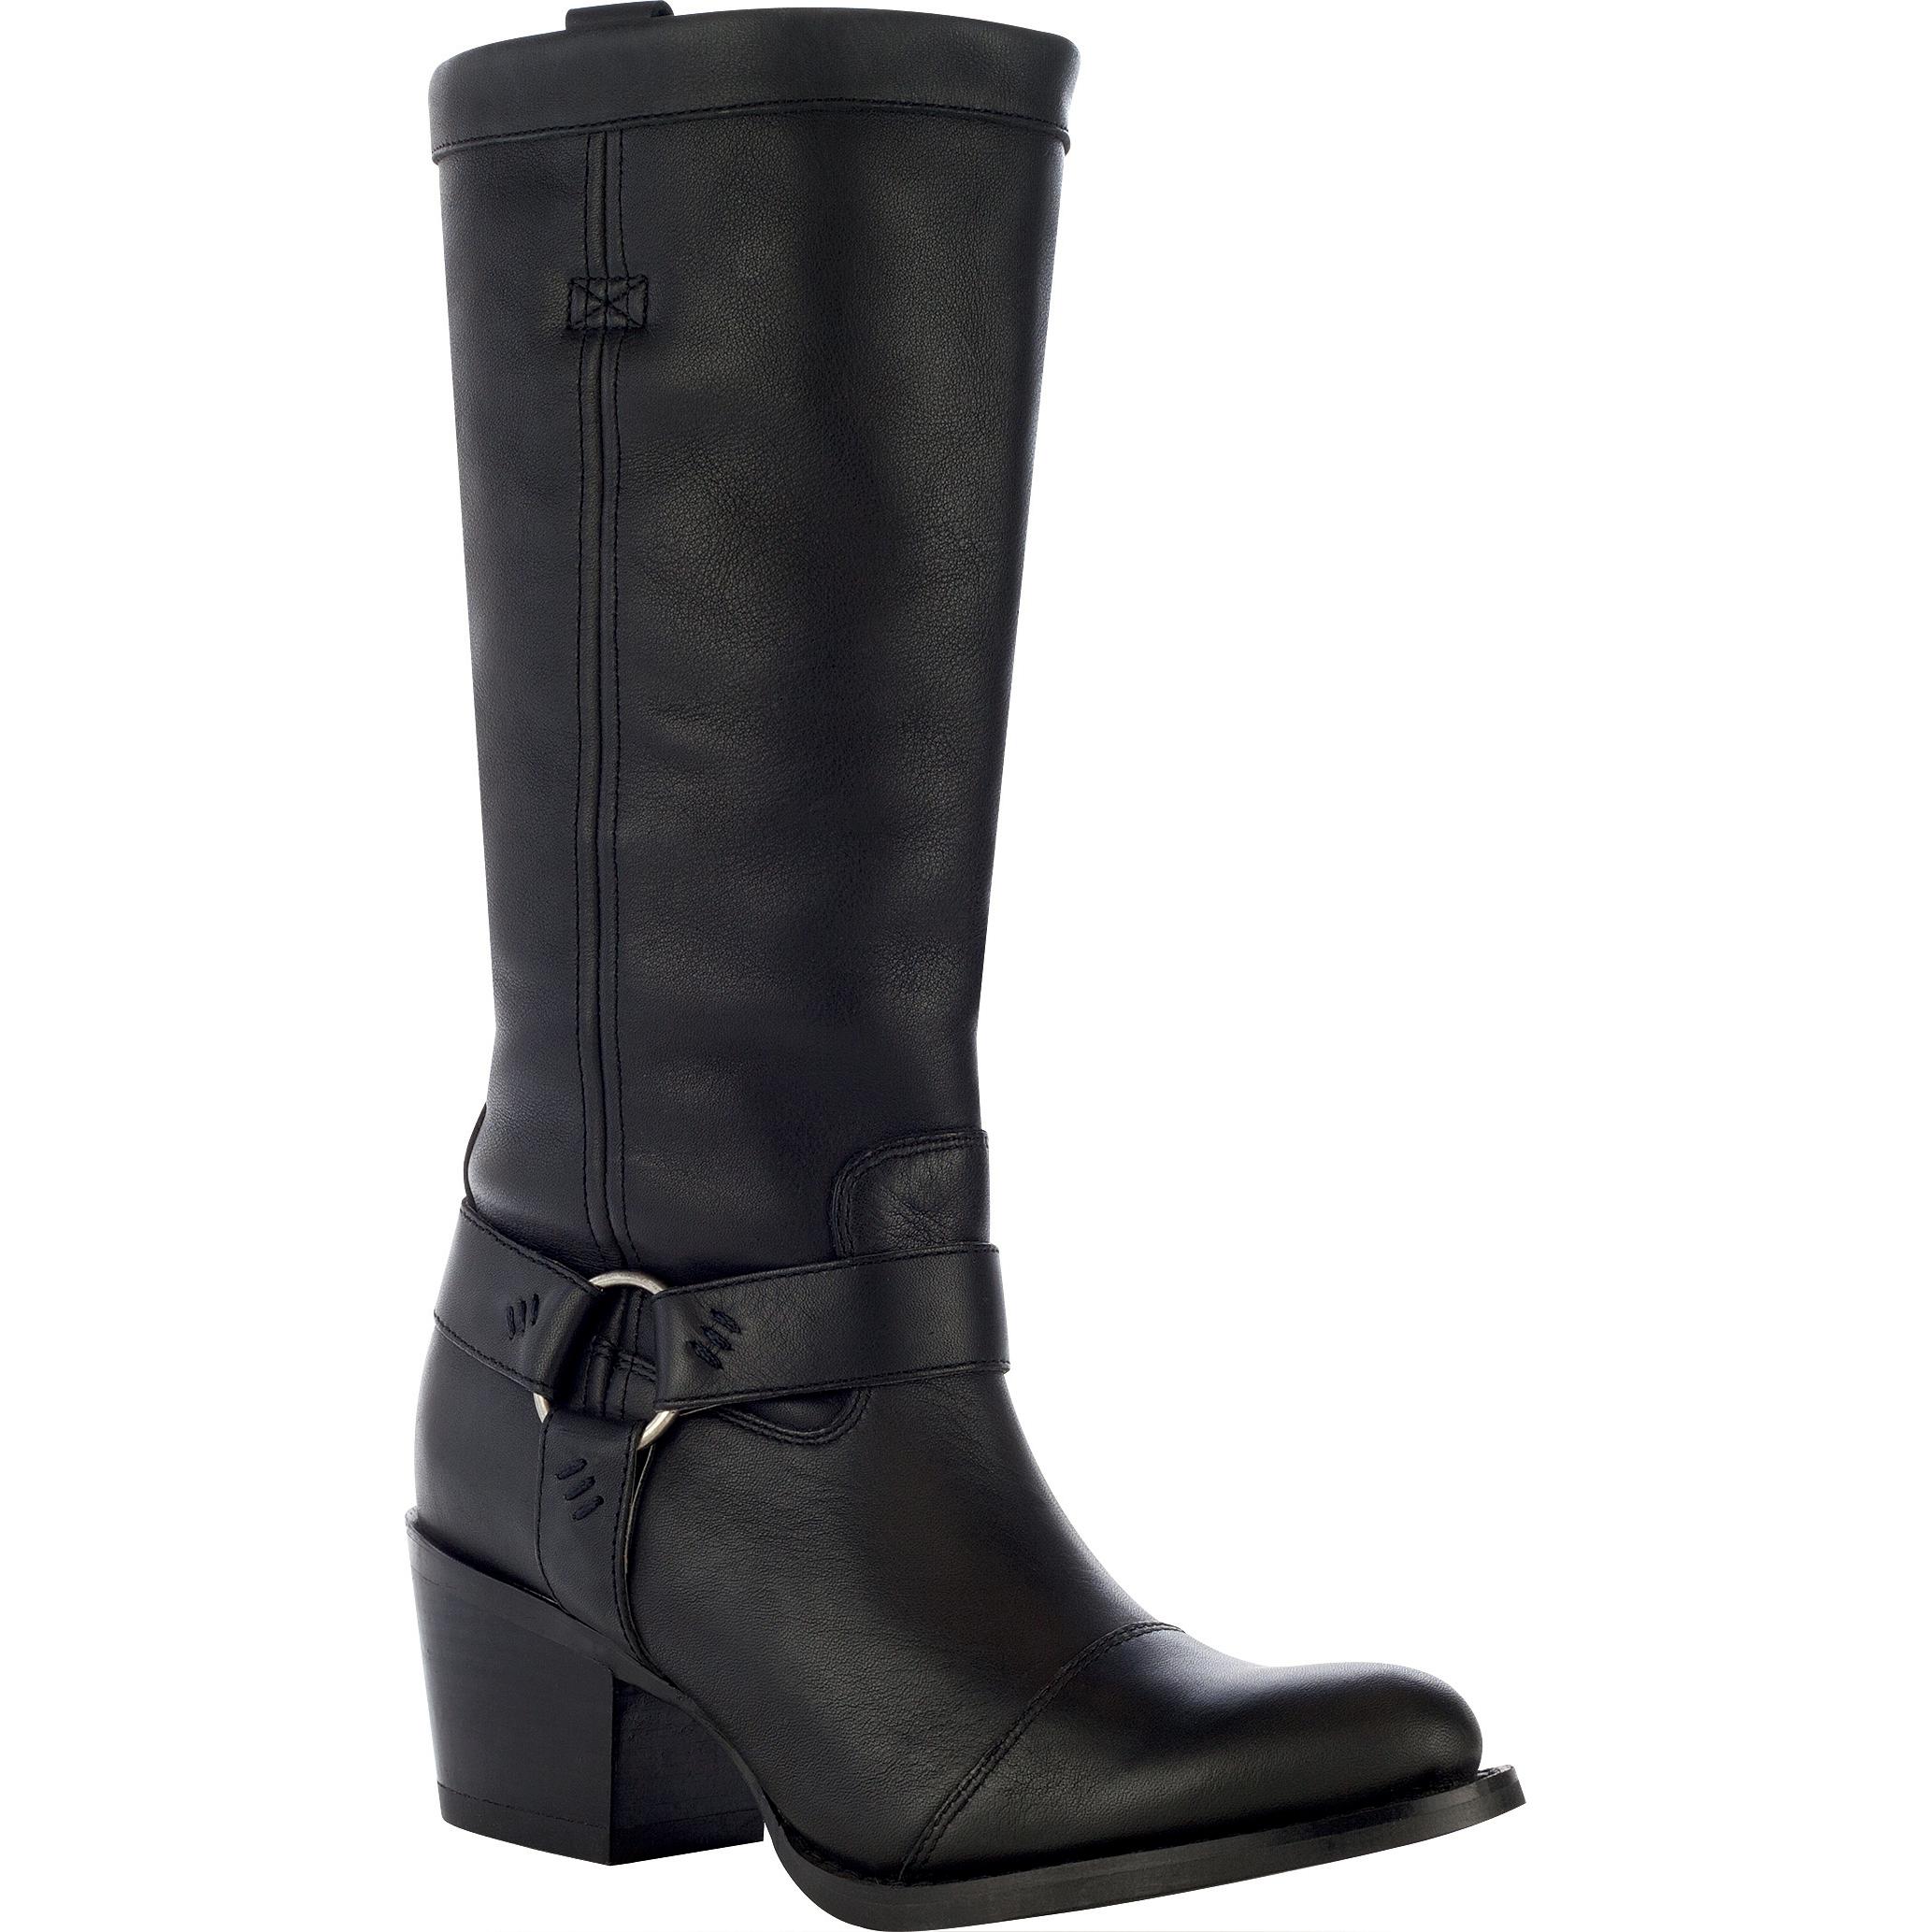 Women's Tall Black Harness Boots - Durango City: Philly Collection ...